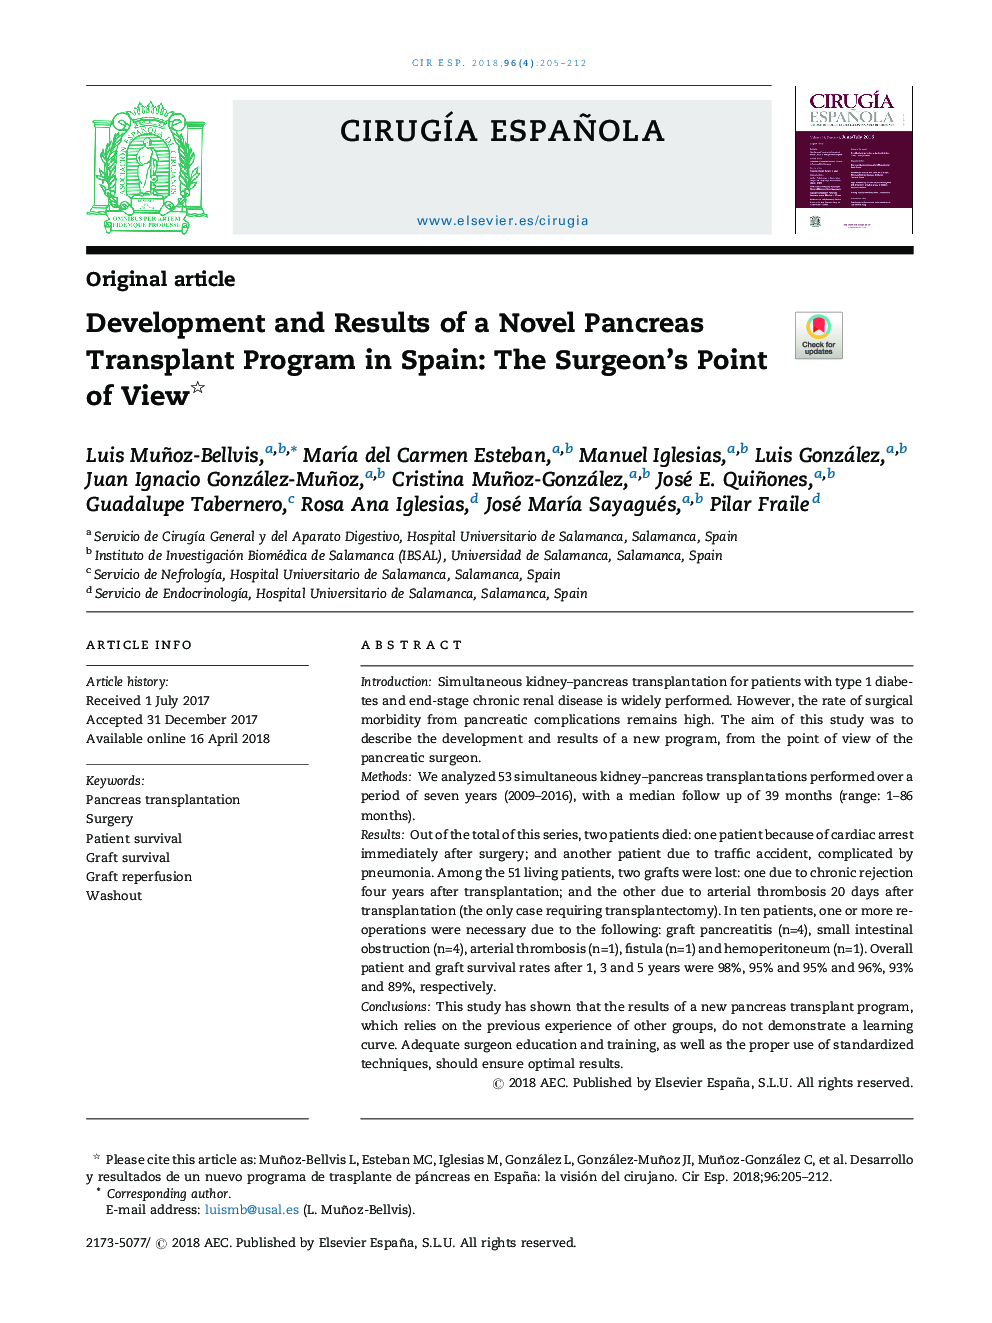 Development and Results of a Novel Pancreas Transplant Program in Spain: The Surgeon's Point of View